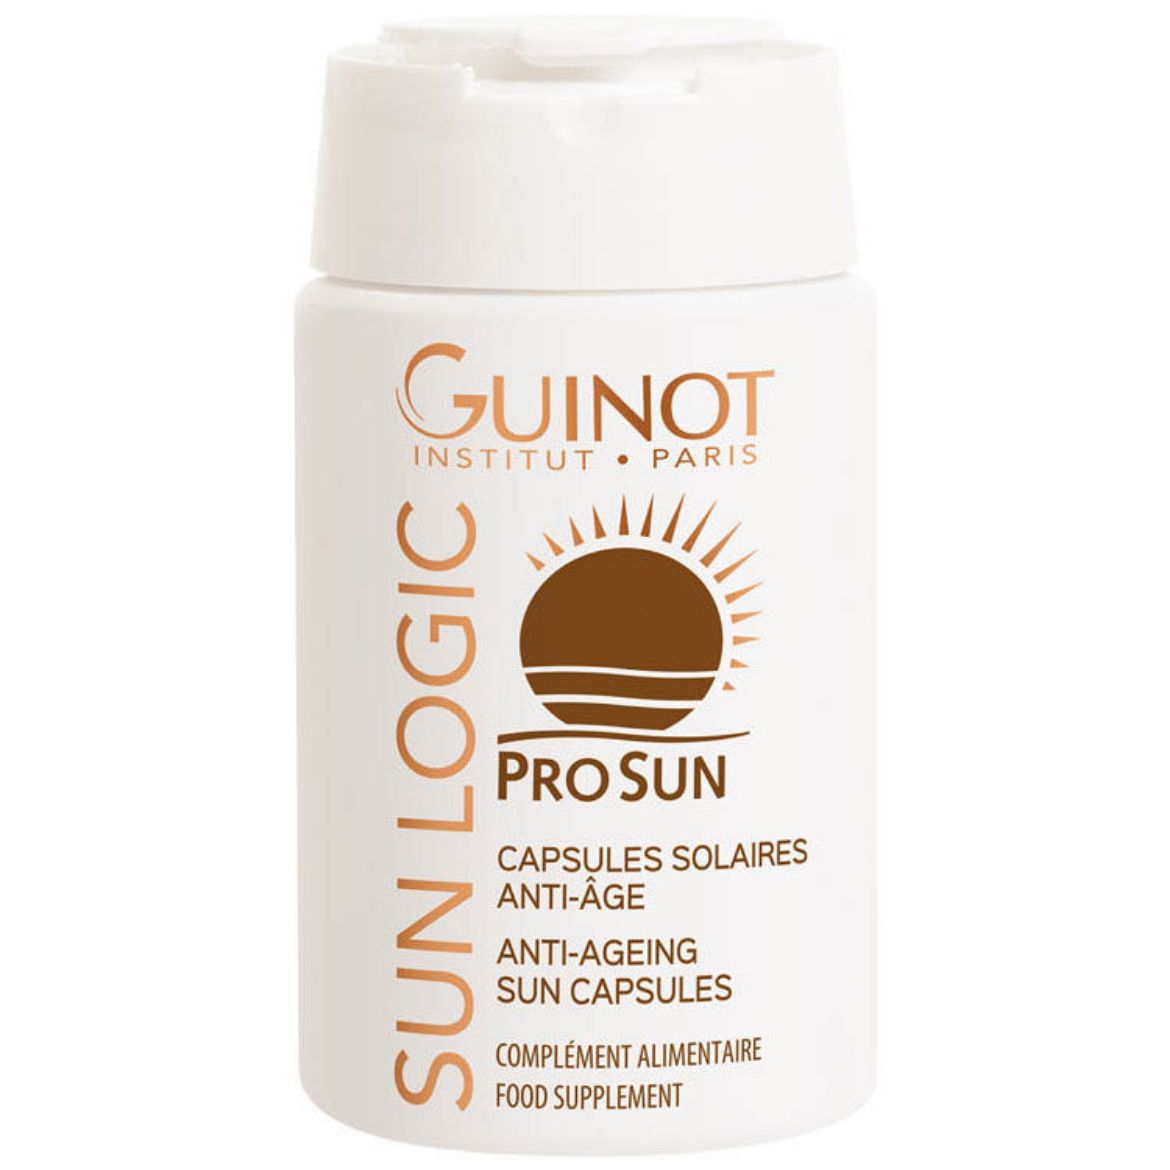 Image of Guinot Pro Sun Capsules Solaires Anti-Age (30Stk)